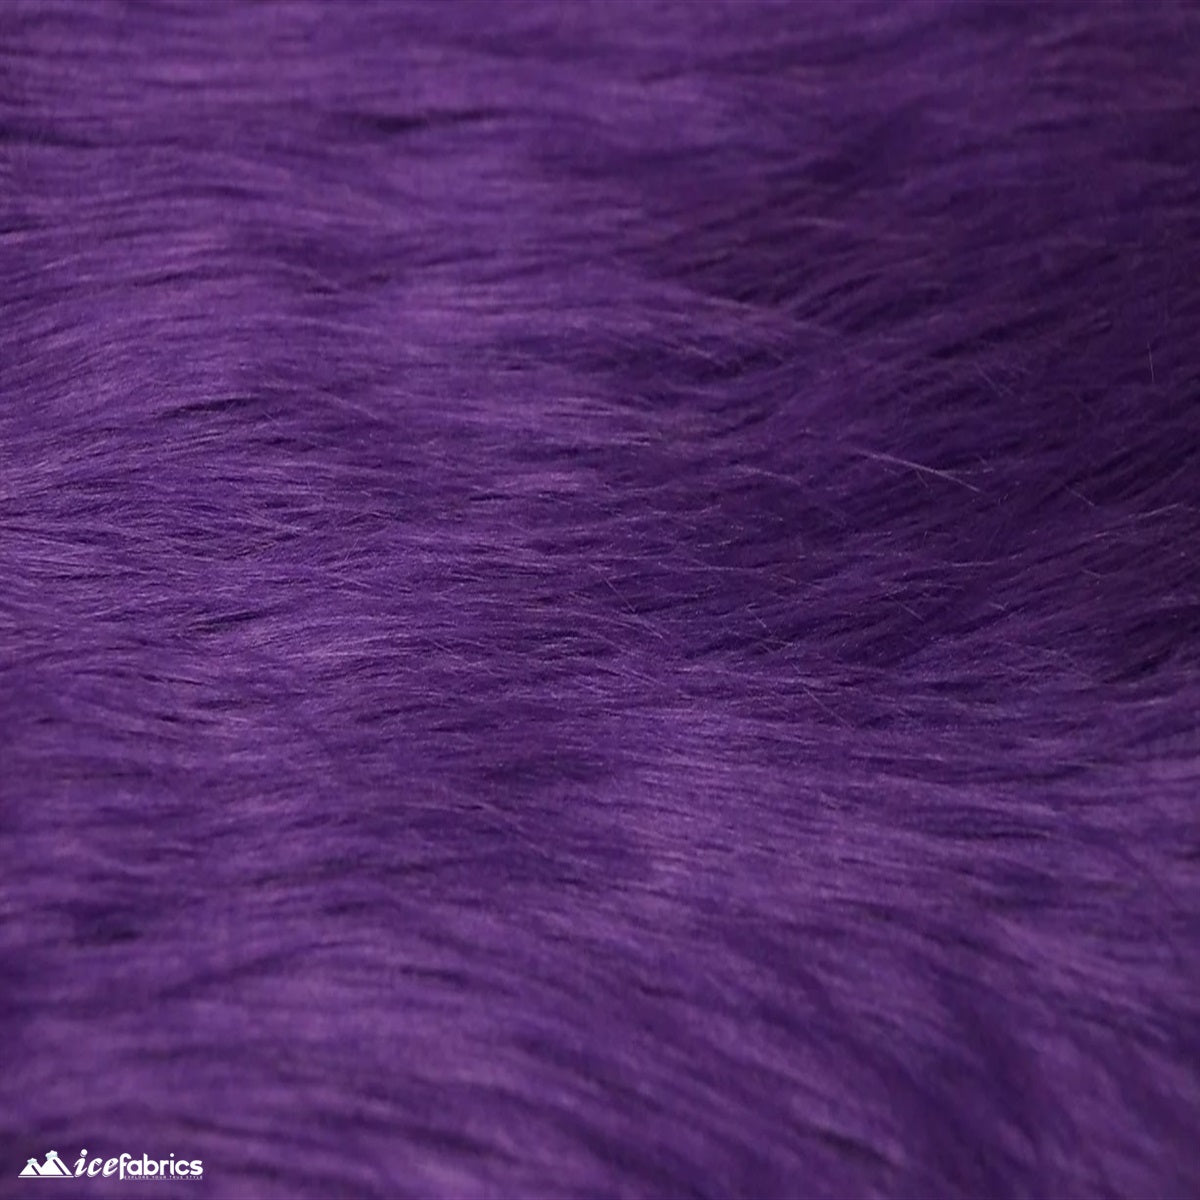 Shaggy Mohair Faux Fur Fabric/ 4 Inches Long PileICE FABRICSICE FABRICSPurple1/2 Yard (60 inches Wide)Shaggy Mohair Faux Fur Fabric/ 4 Inches Long Pile ICE FABRICS